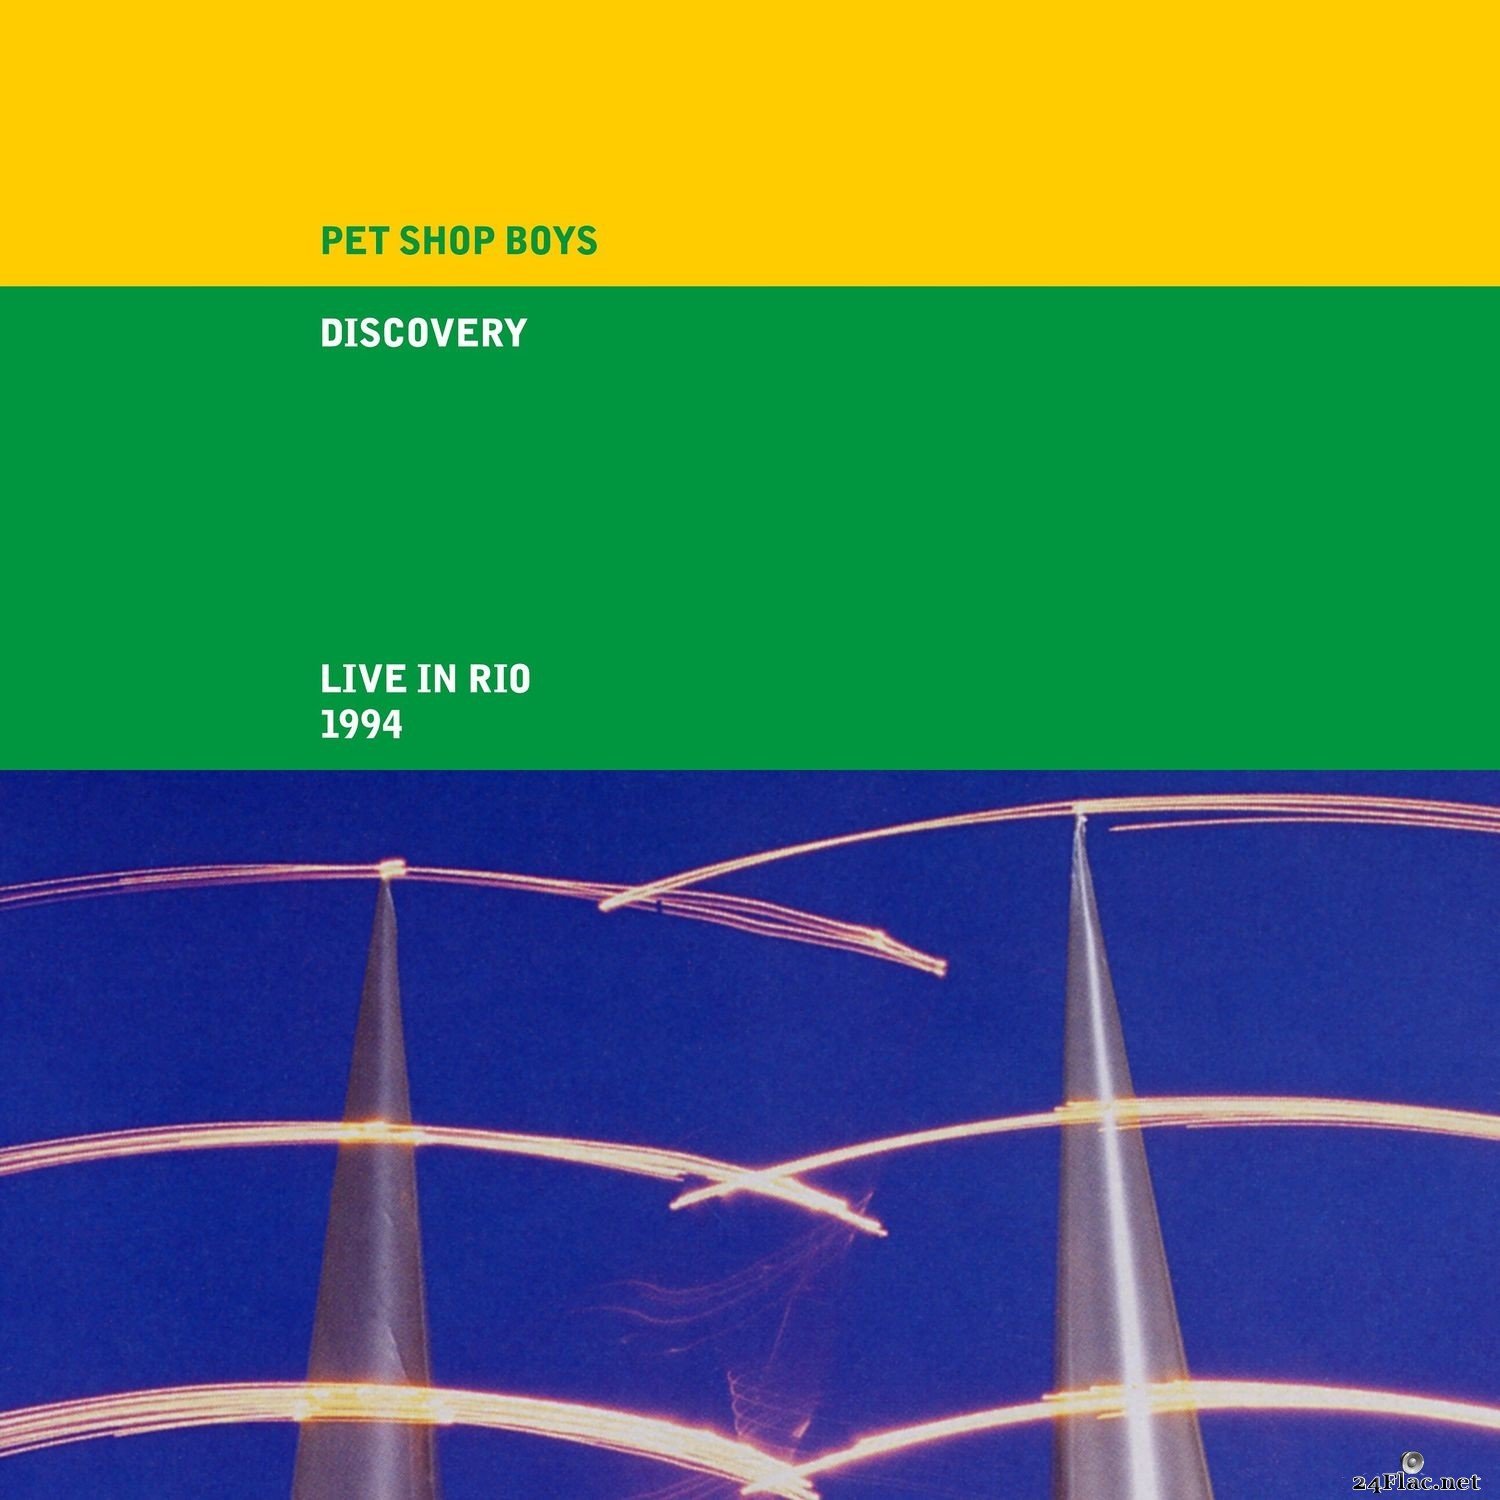 Pet Shop Boys - Discovery (Live in Rio 1994) (2021) FLAC